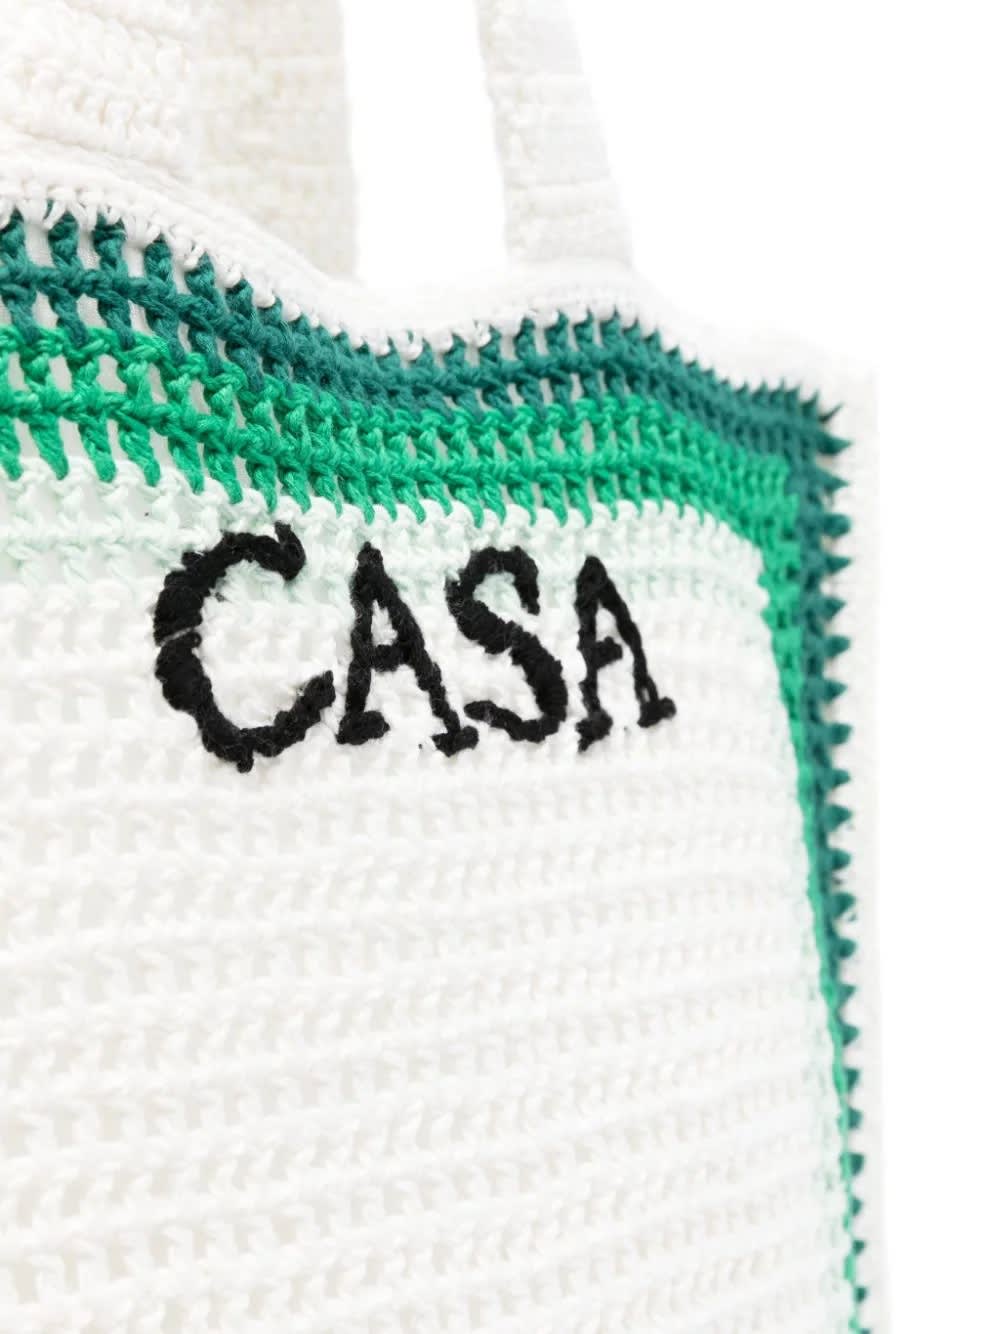 Shop Casablanca Crocheted Tennis Tote Bag In Green And White